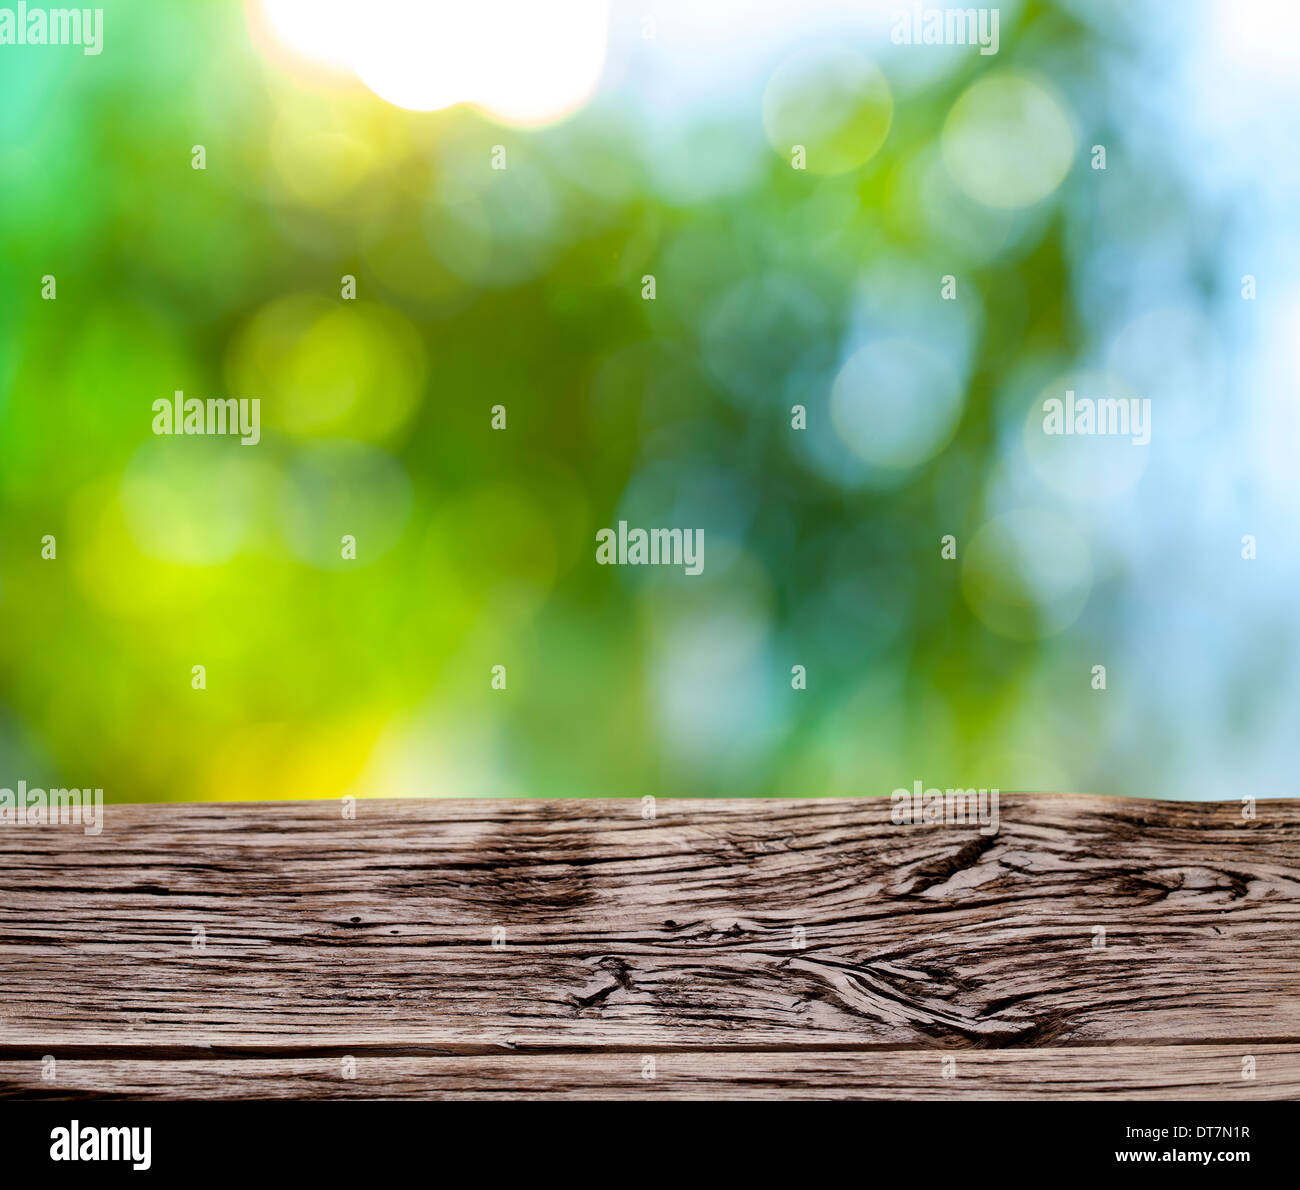 Blurred nature background. In foreground the old wooden table. Stock Photo